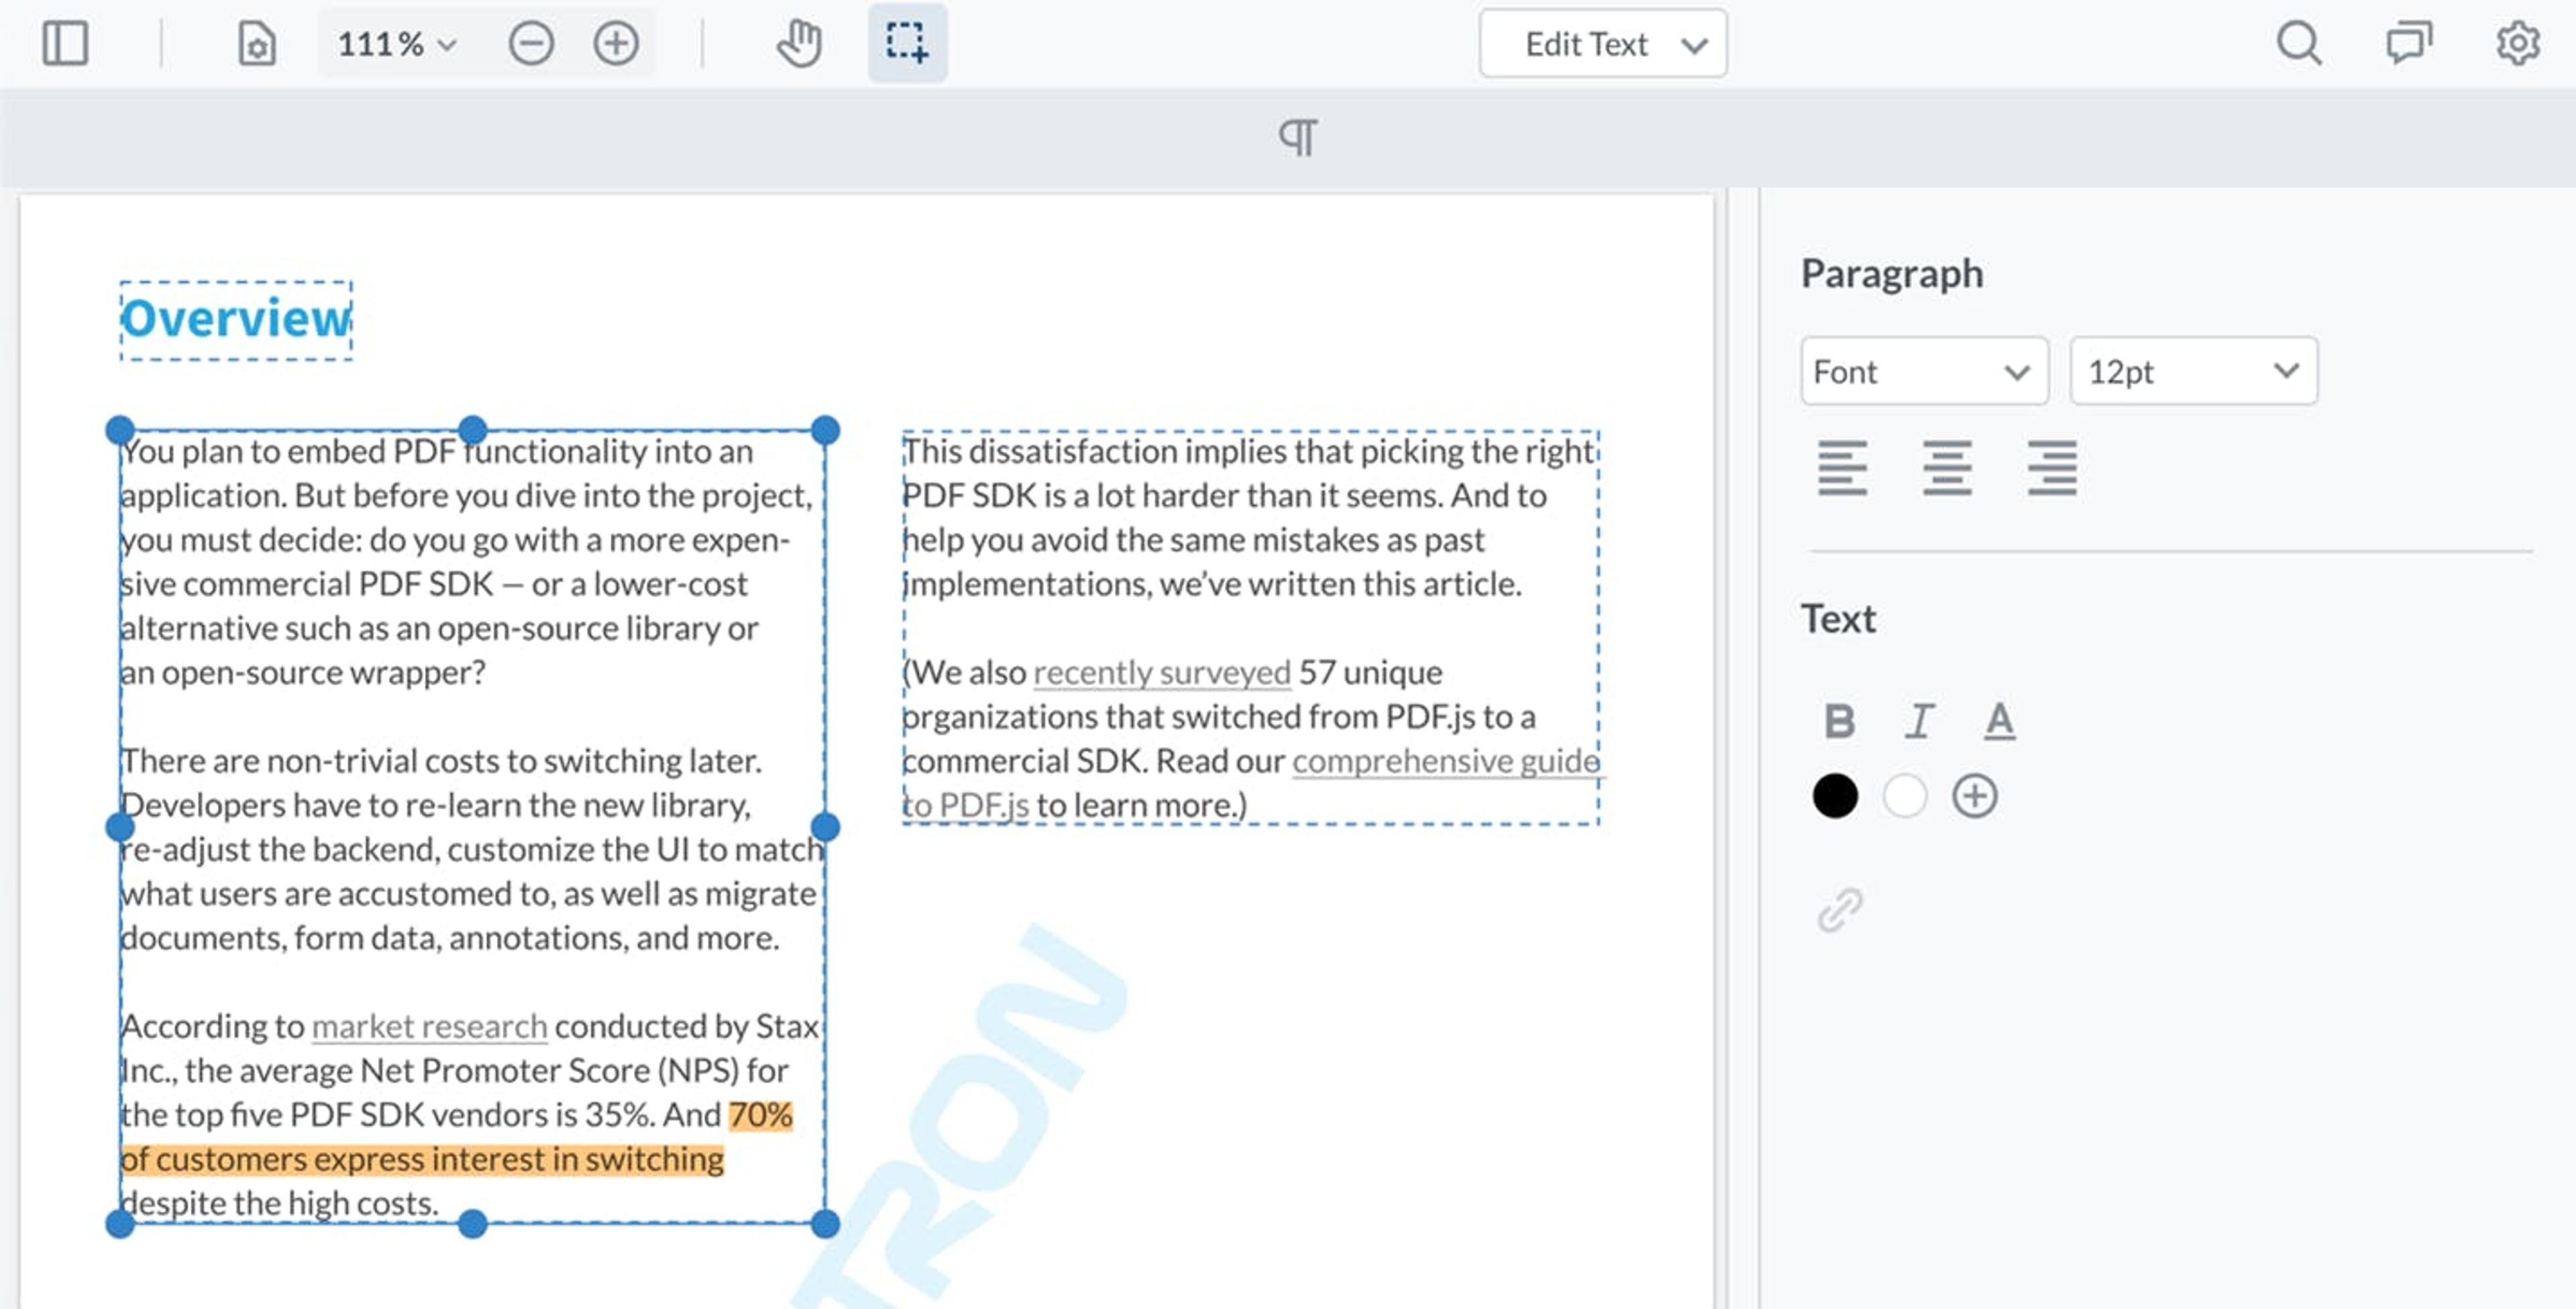 WebViewer's state-of-the-art PDF text editor 